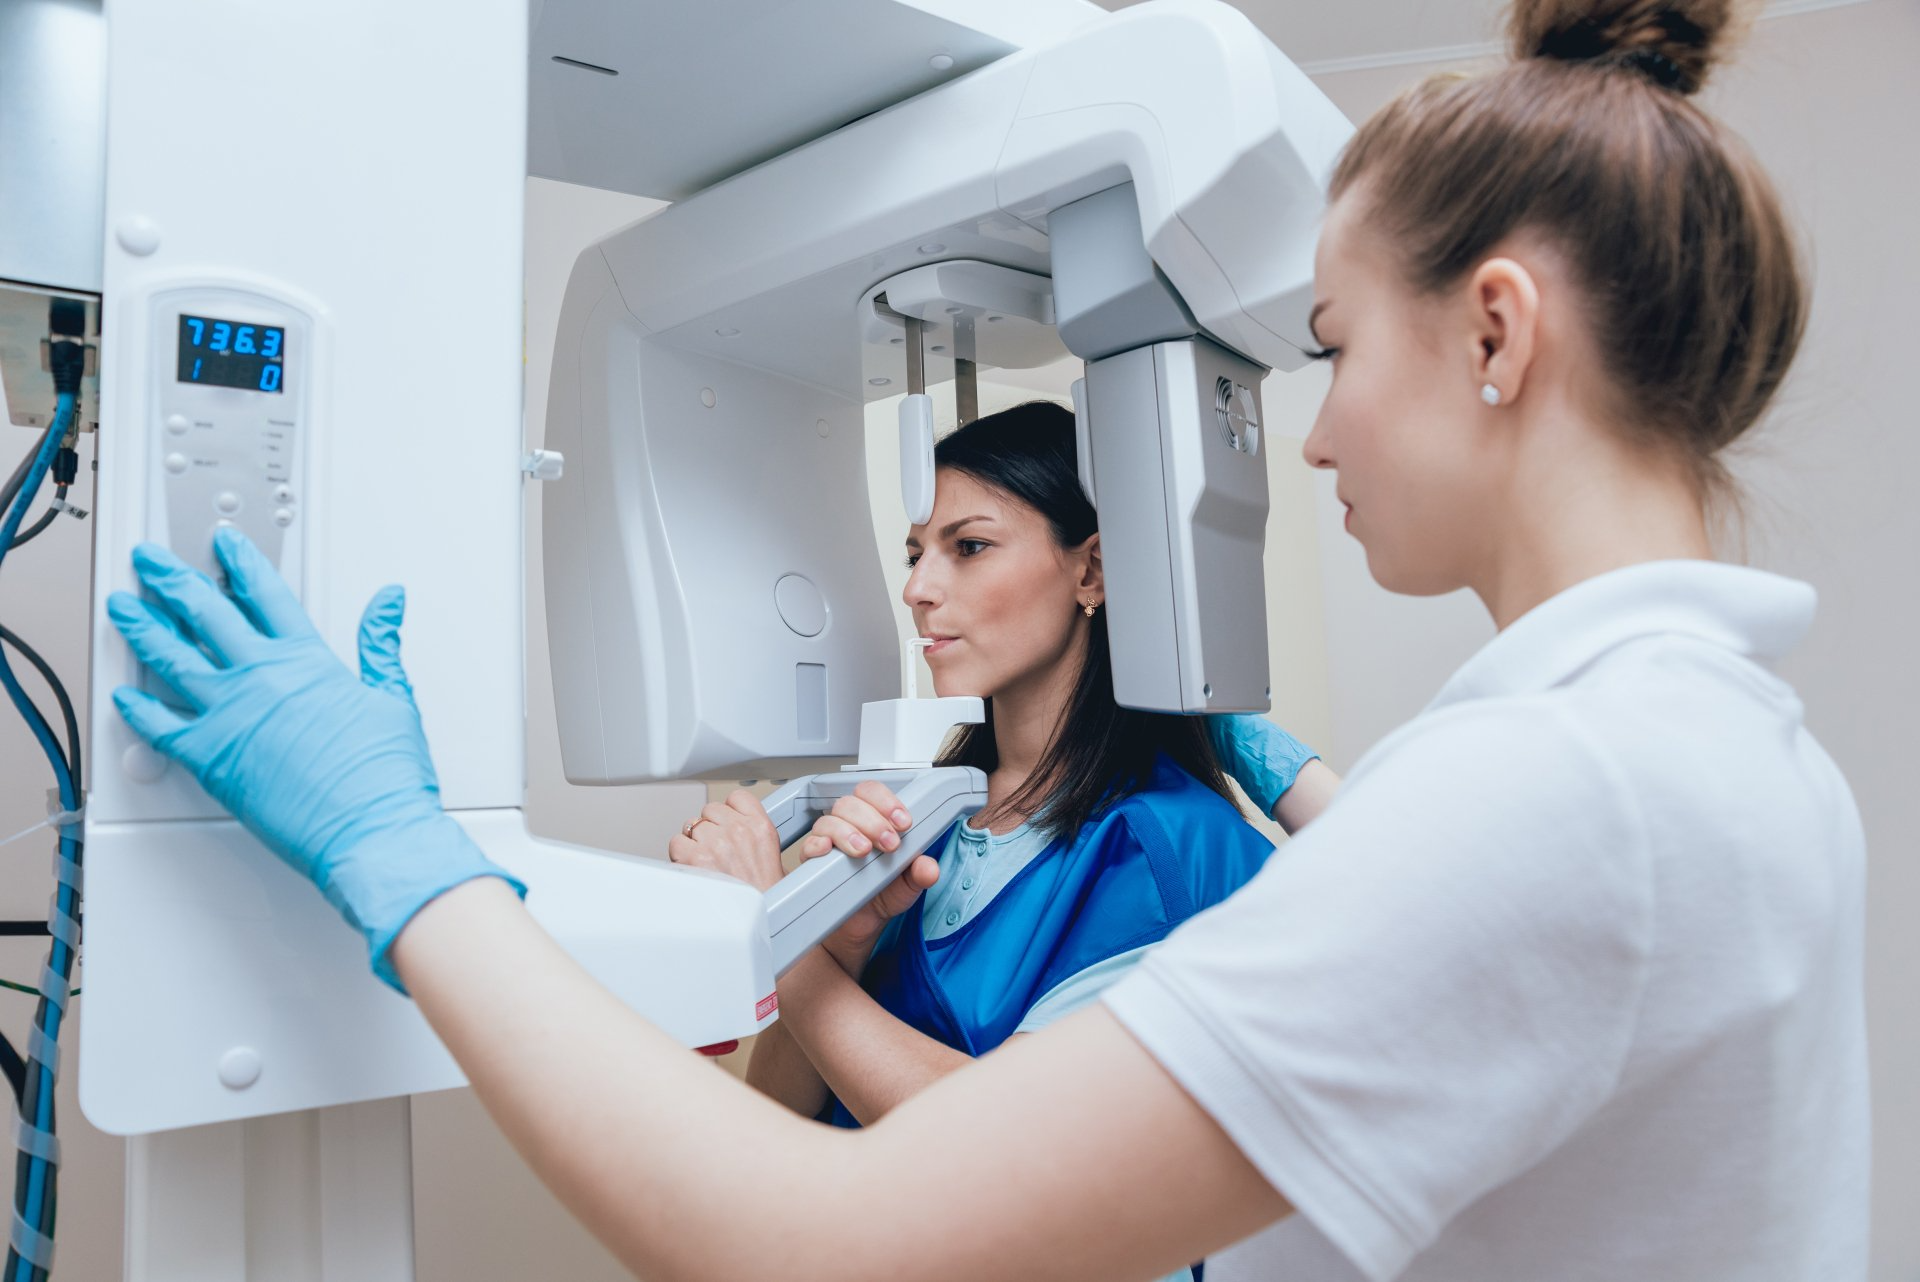 Dental technology | x ray machine | dentist near you | female patient getting an x ray | Generations Cosmetic and Family Dentistry | Best Cosmetic and Family Dentist In Tampa, Florida